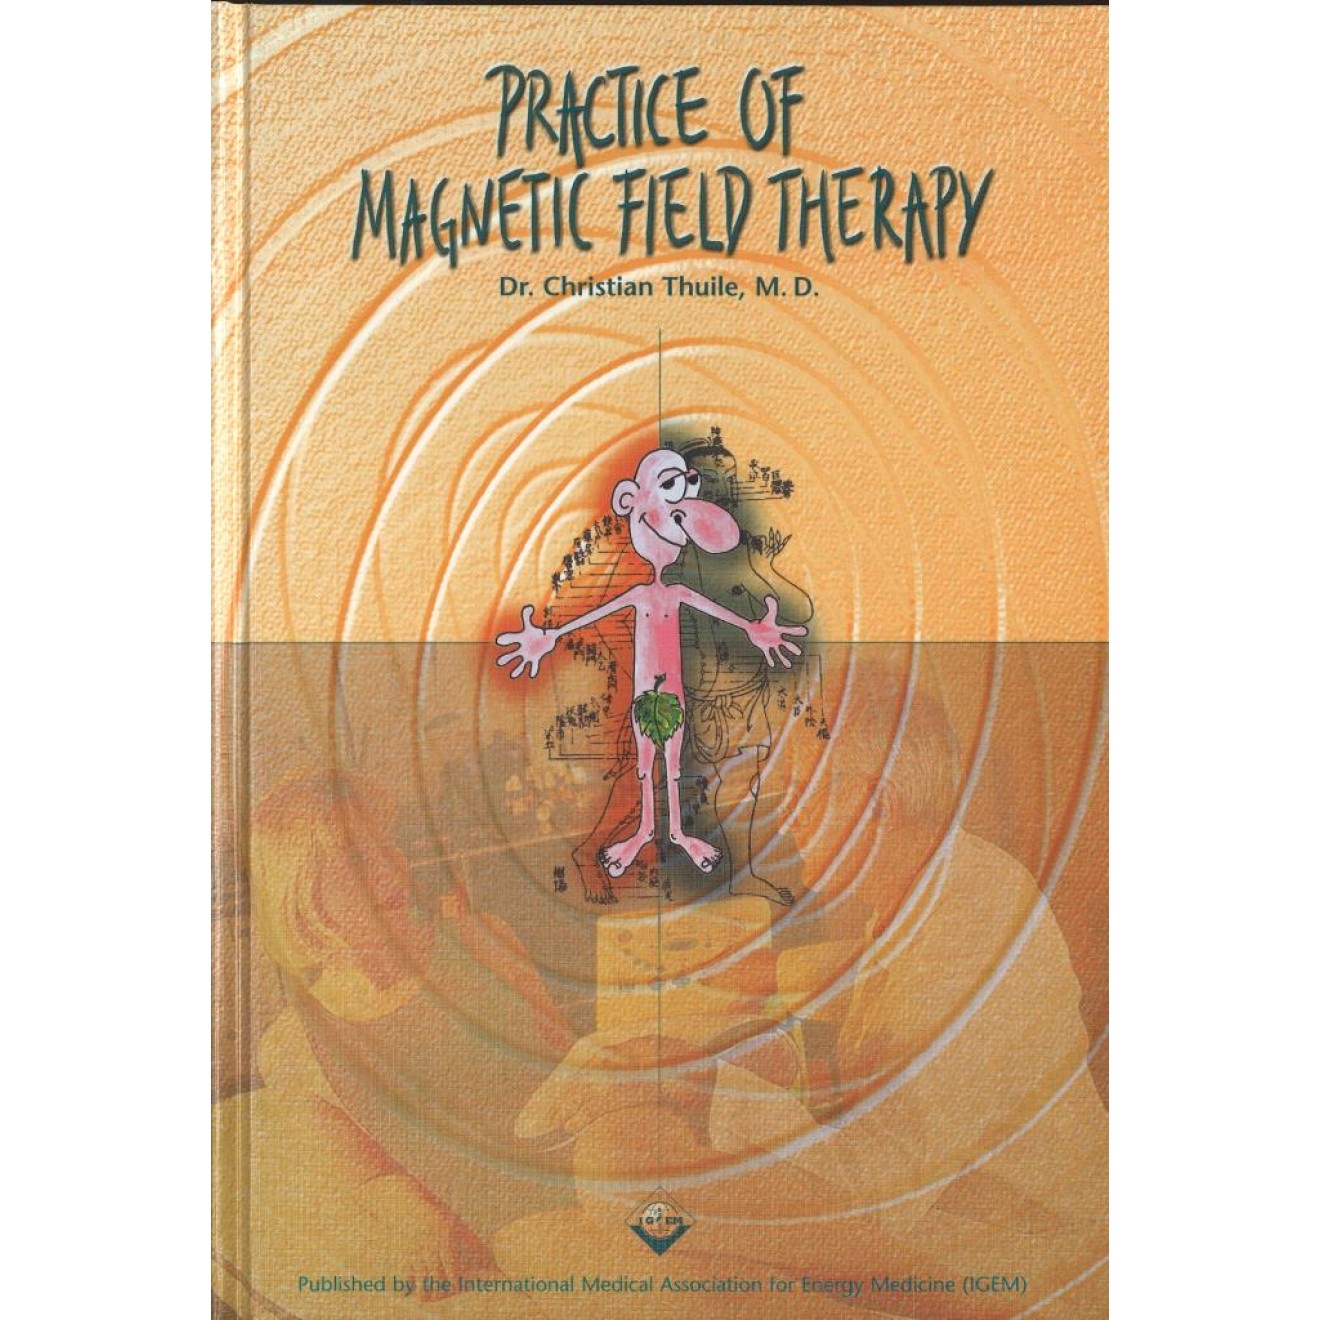 Practice of magnetic field therapy